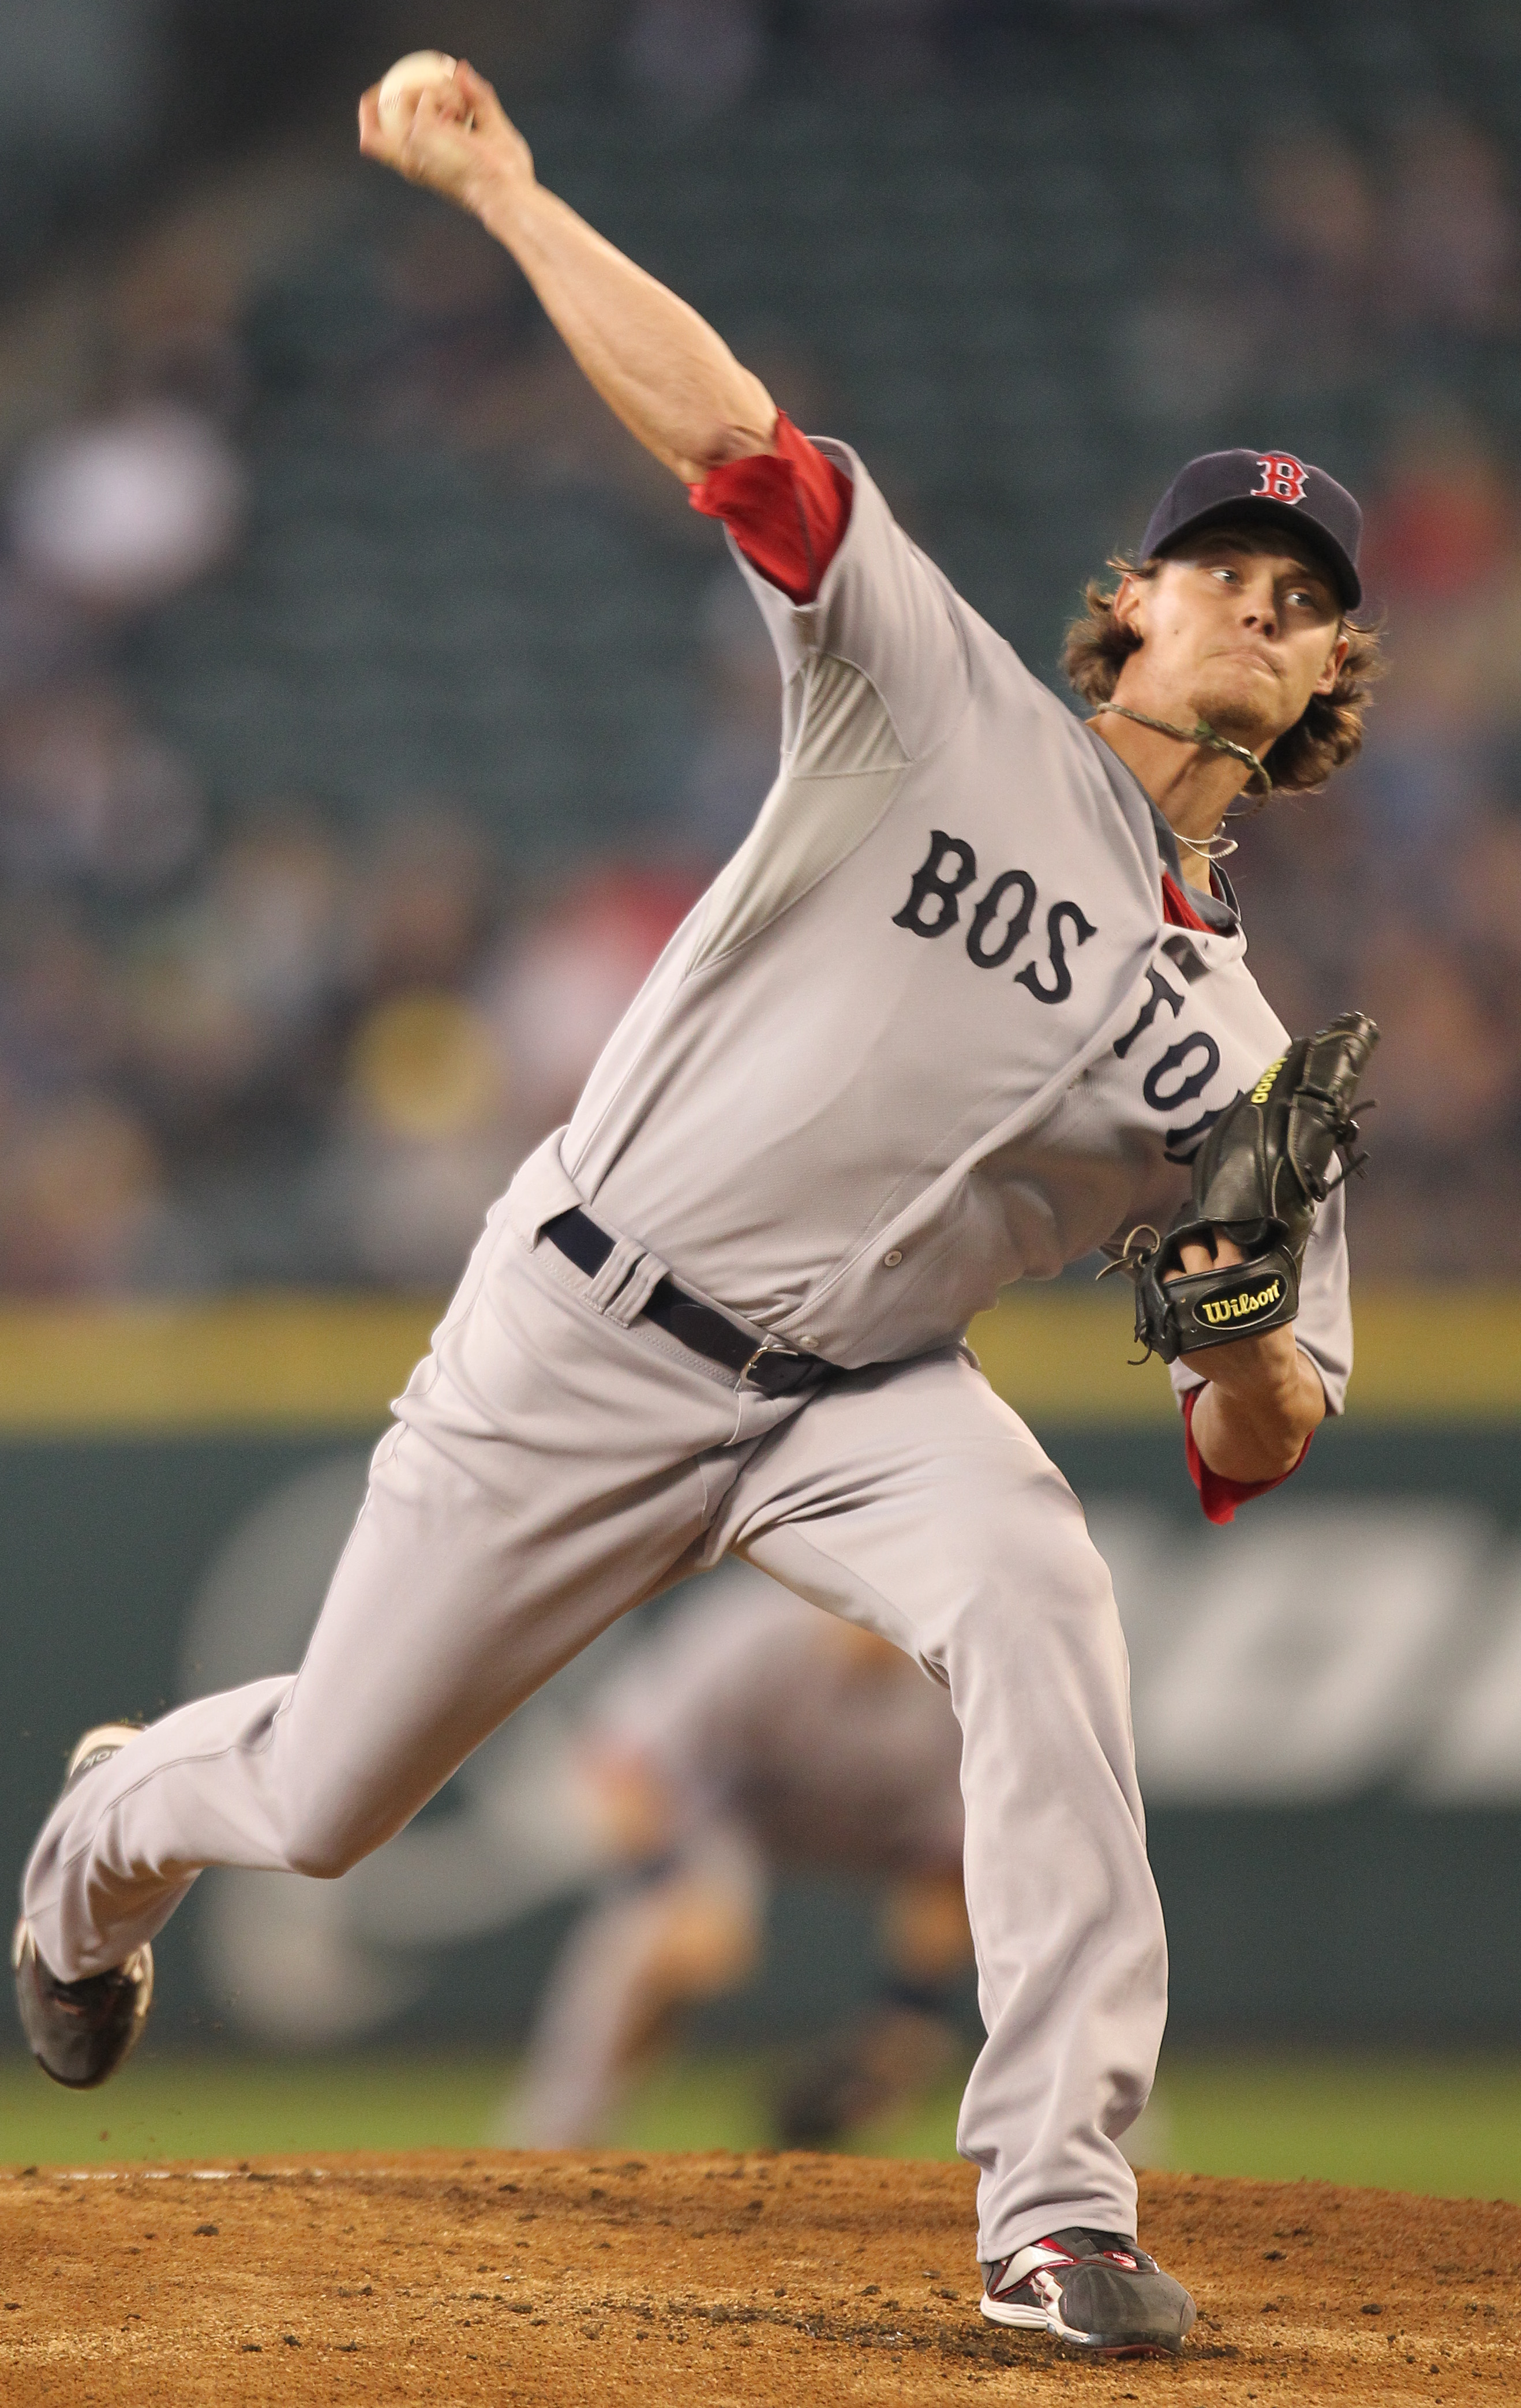 SEATTLE - SEPTEMBER 15:  Starting pitcher Clay Buchholz #11 of the Boston Red Sox pitches against the Seattle Mariners at Safeco Field on September 15, 2010 in Seattle, Washington. (Photo by Otto Greule Jr/Getty Images)